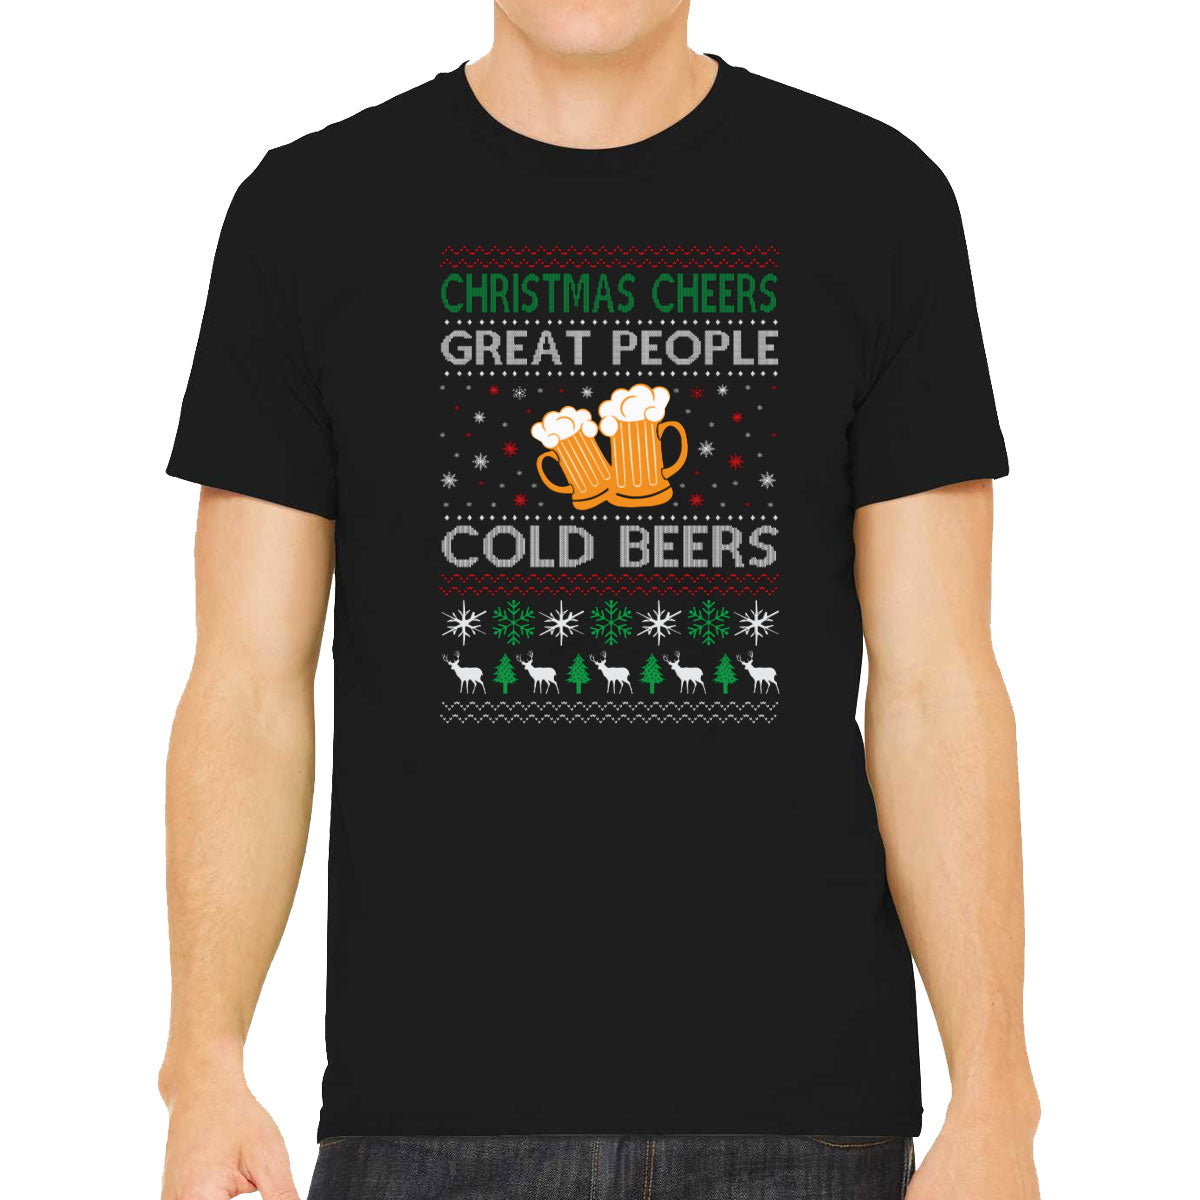 Christmas Cheers Great People Cold Beers Men's T-shirt